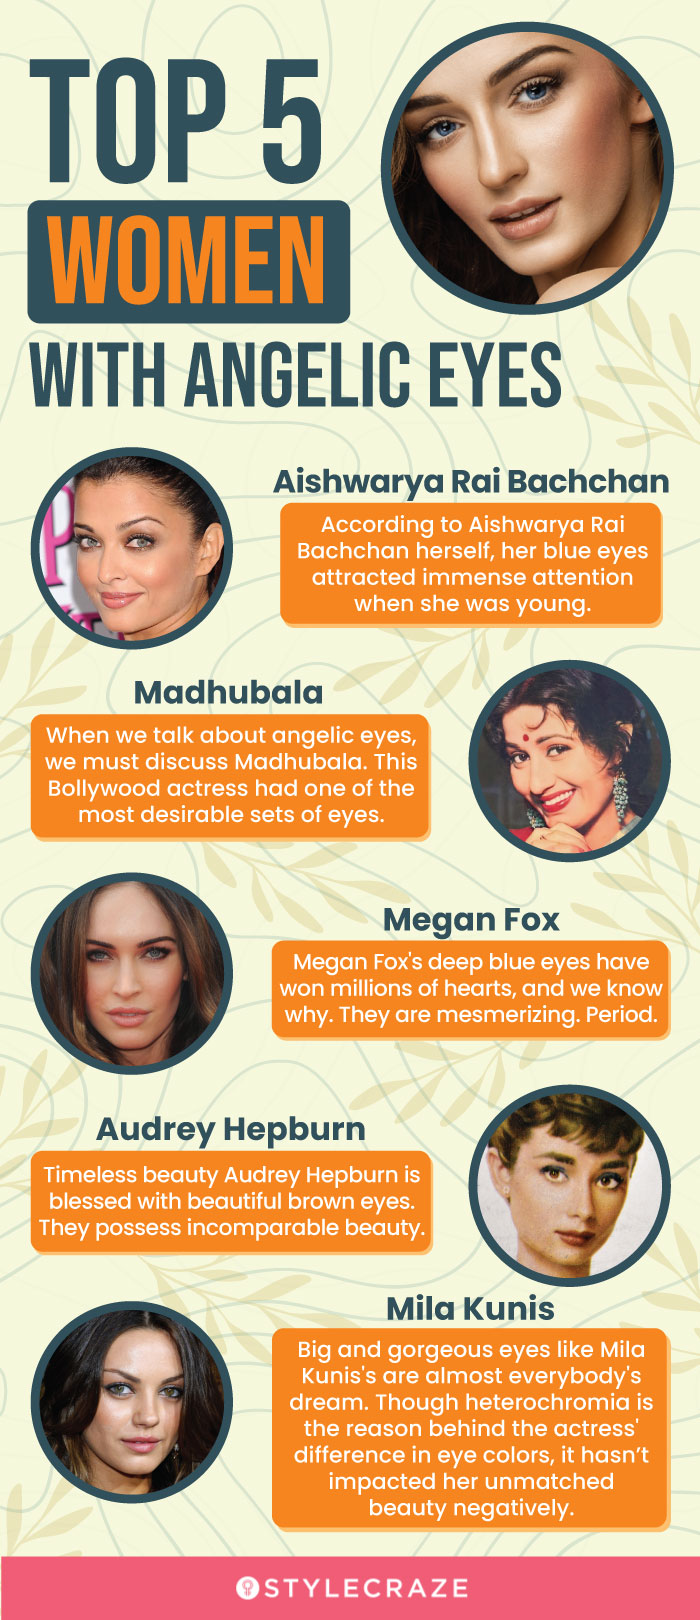 top 5 women with angelic eyes [infographic]